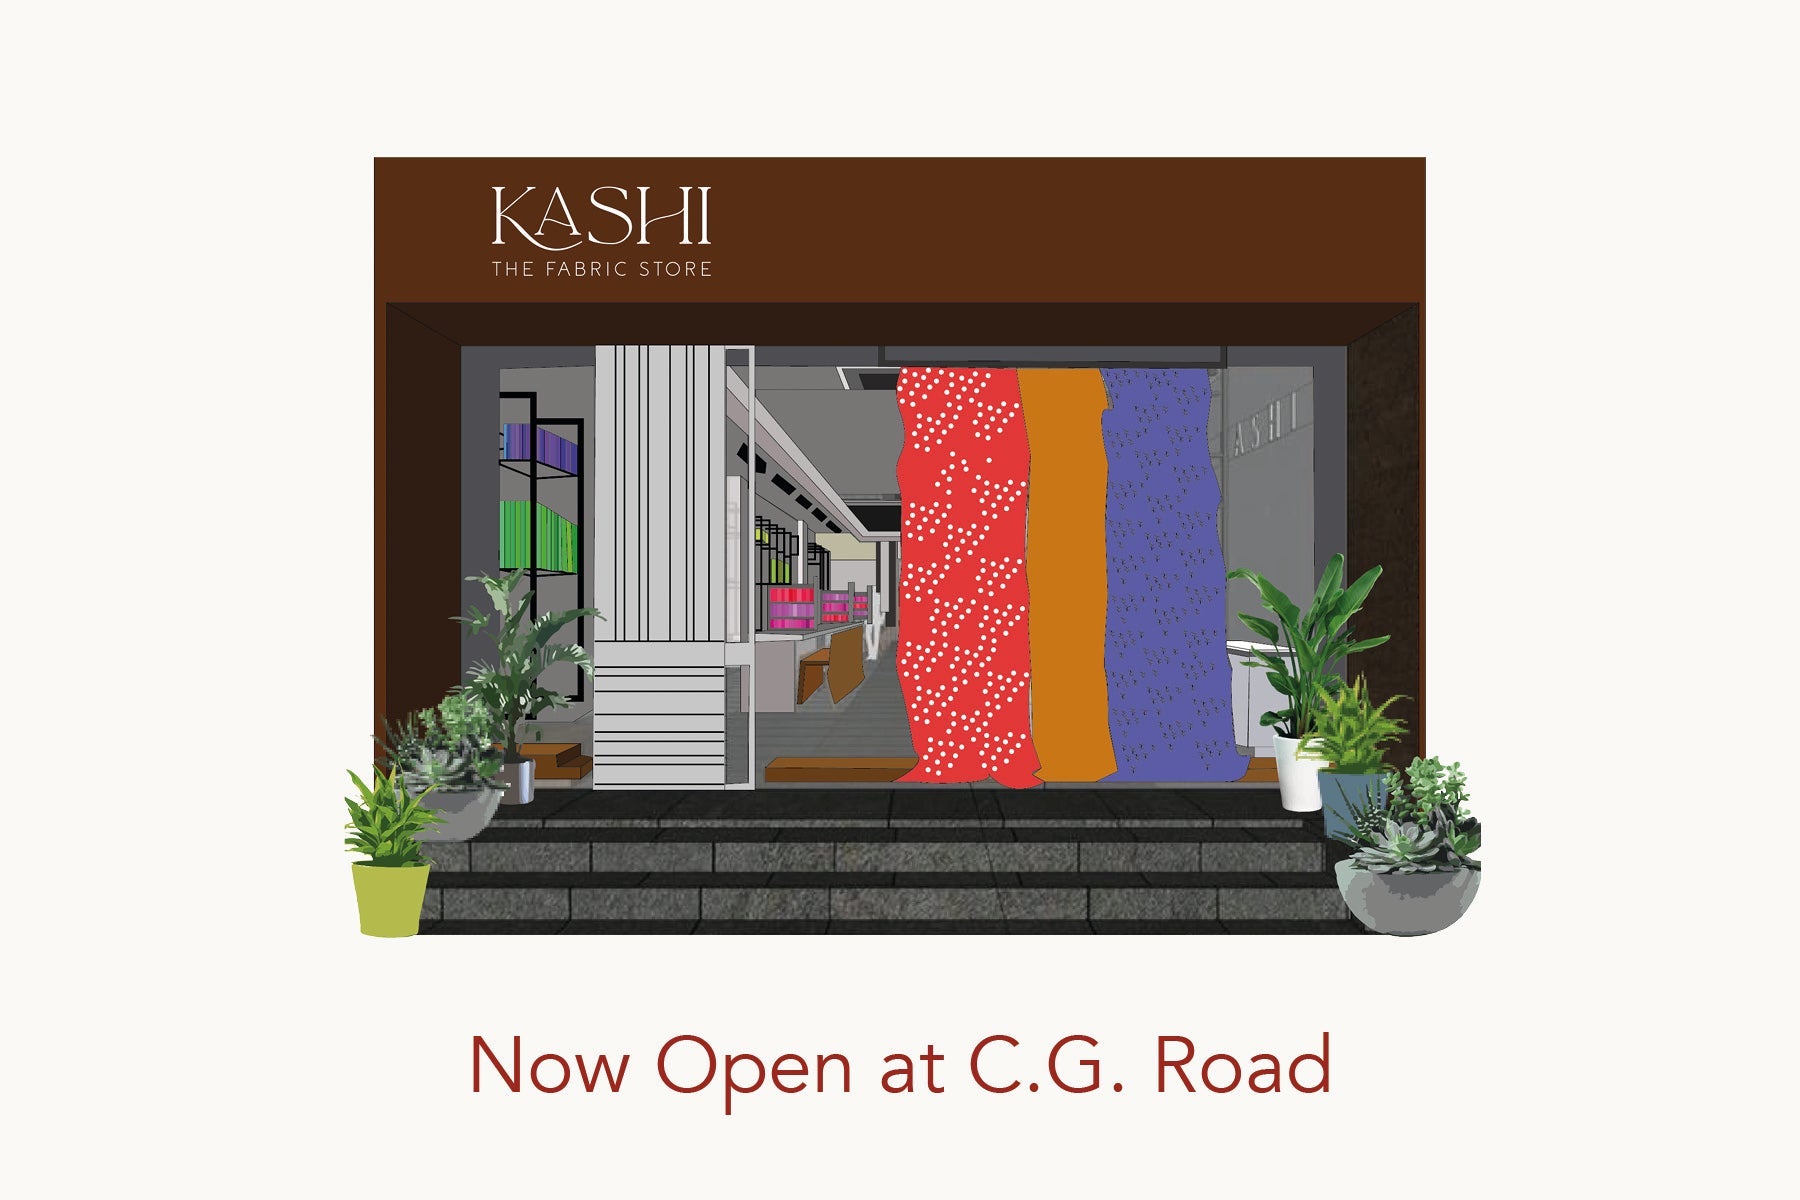 Kashi- The Fabric Store launches its first standalone store in Ahmedabad - Ciceroni